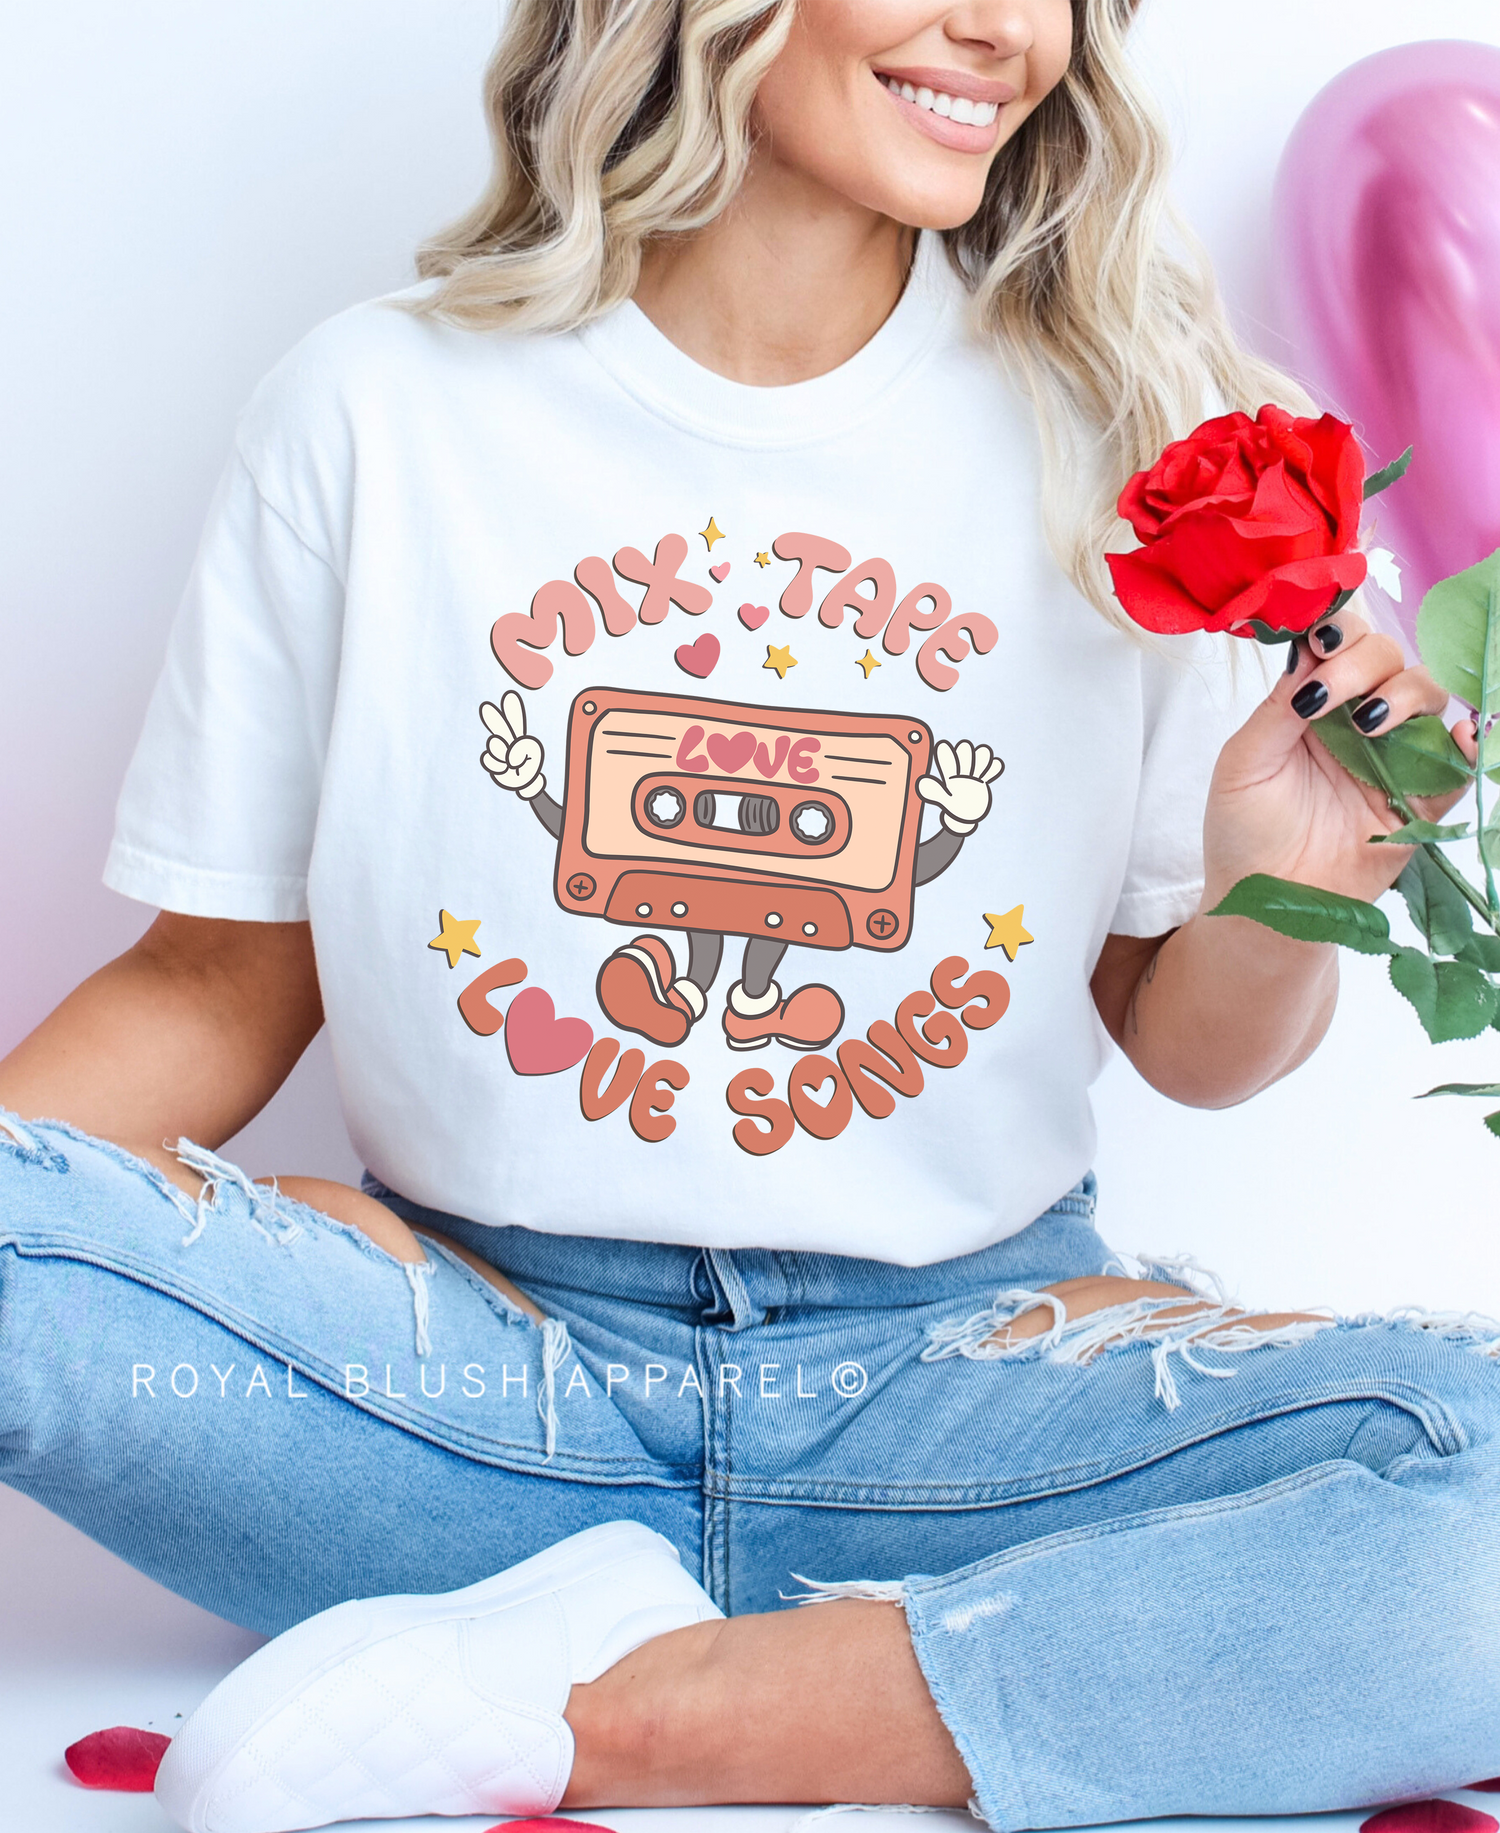 Mix Tape Love Songs Relaxed Unisex T-shirt